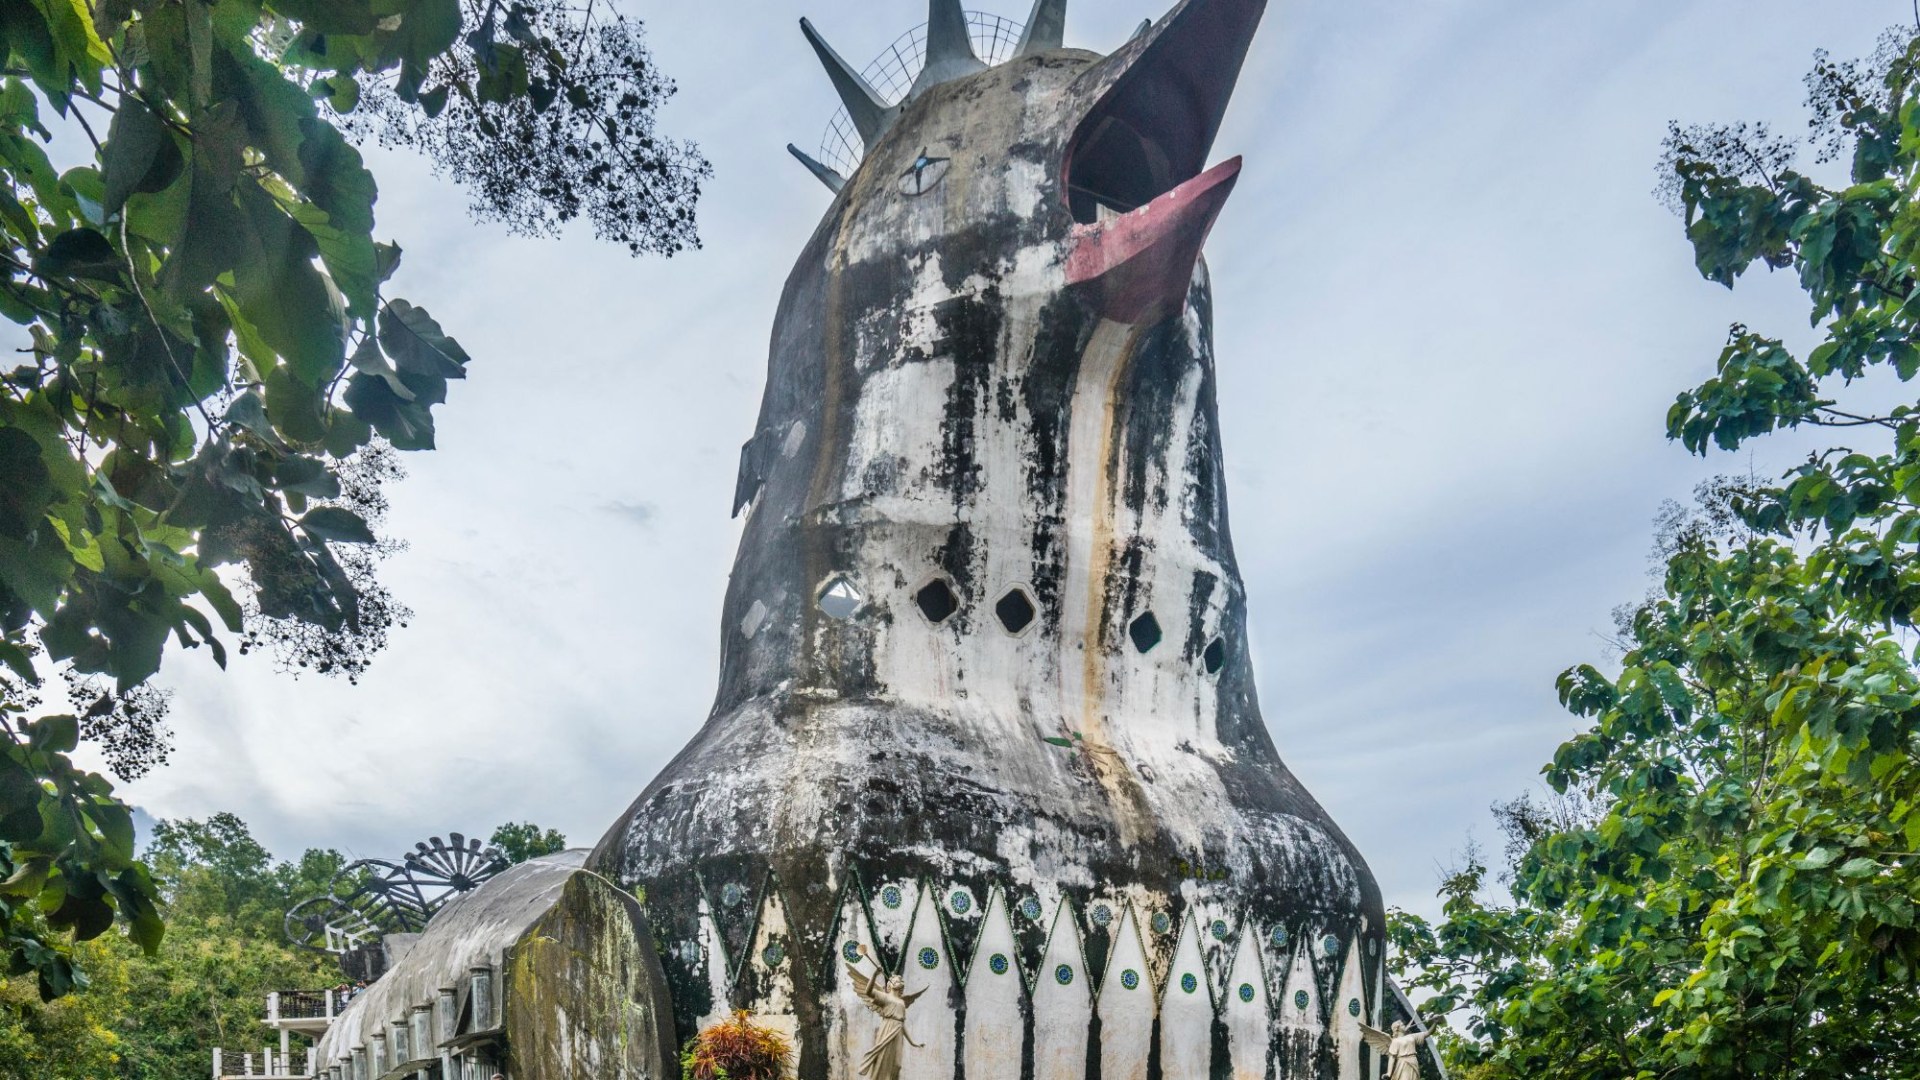 World’s weirdest abandoned ‘church’ built by man who ‘had vision from God’ left to crumble in jungle for decades [Video]